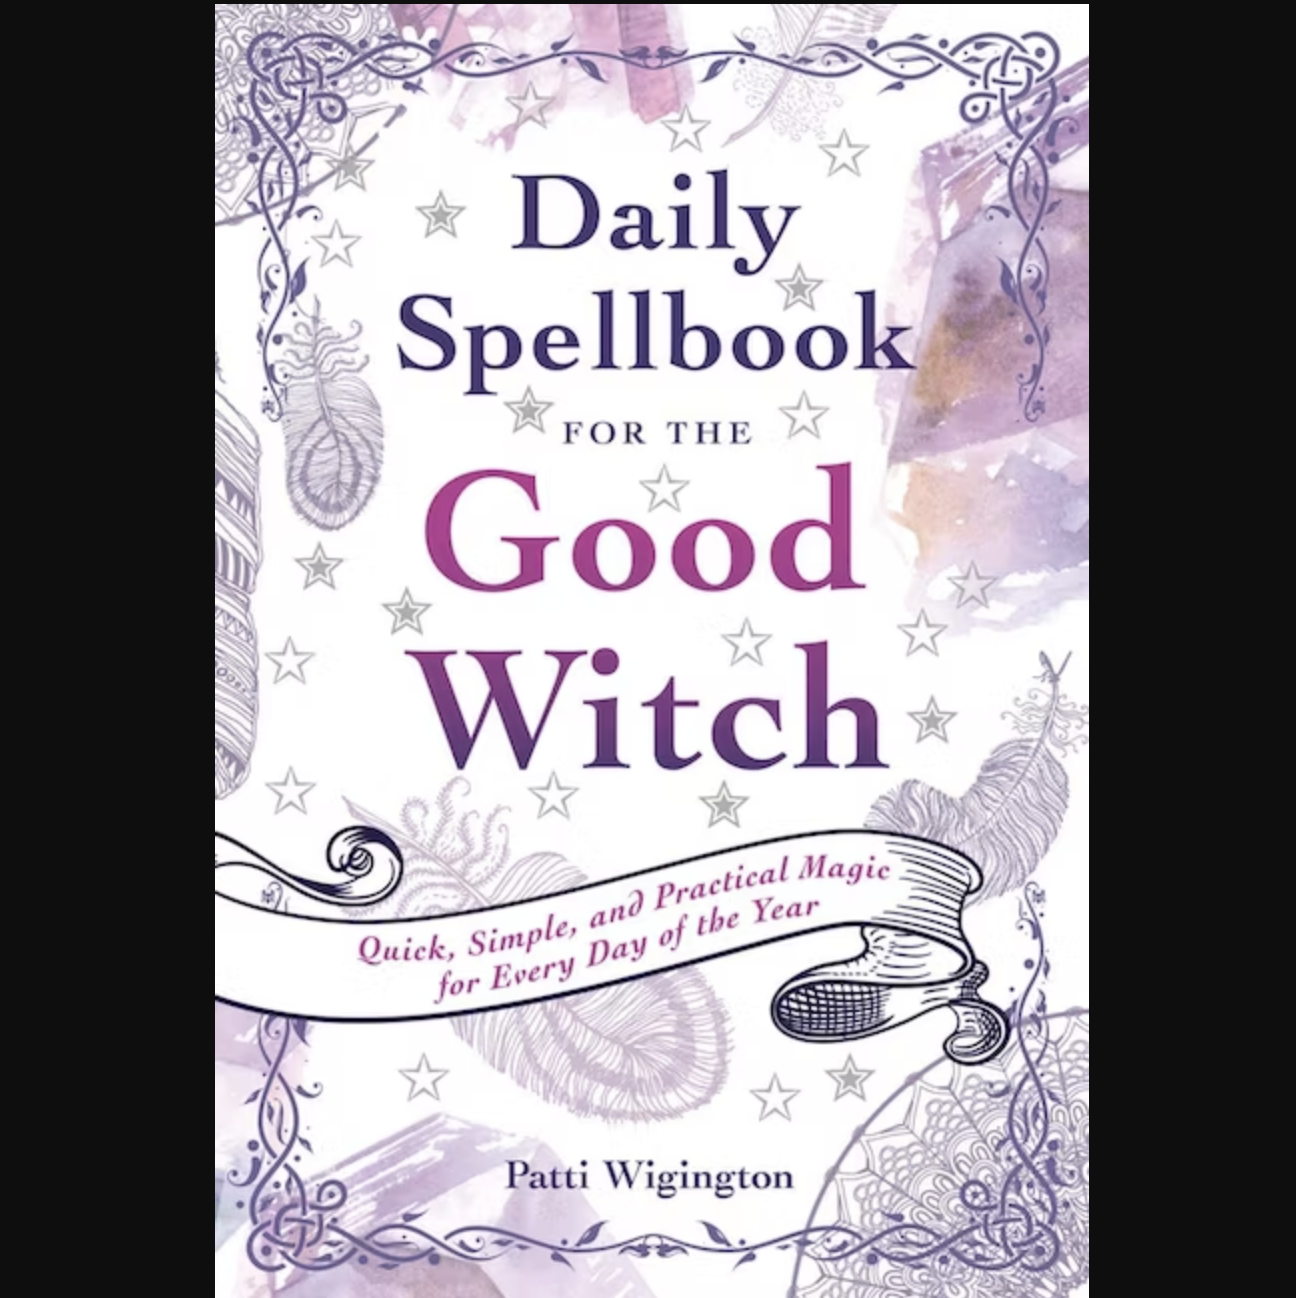 Daily Spellbook for the Good Witch: Quick, Simple, and Practical Magic for Every Day of the Year by Patti Wigington